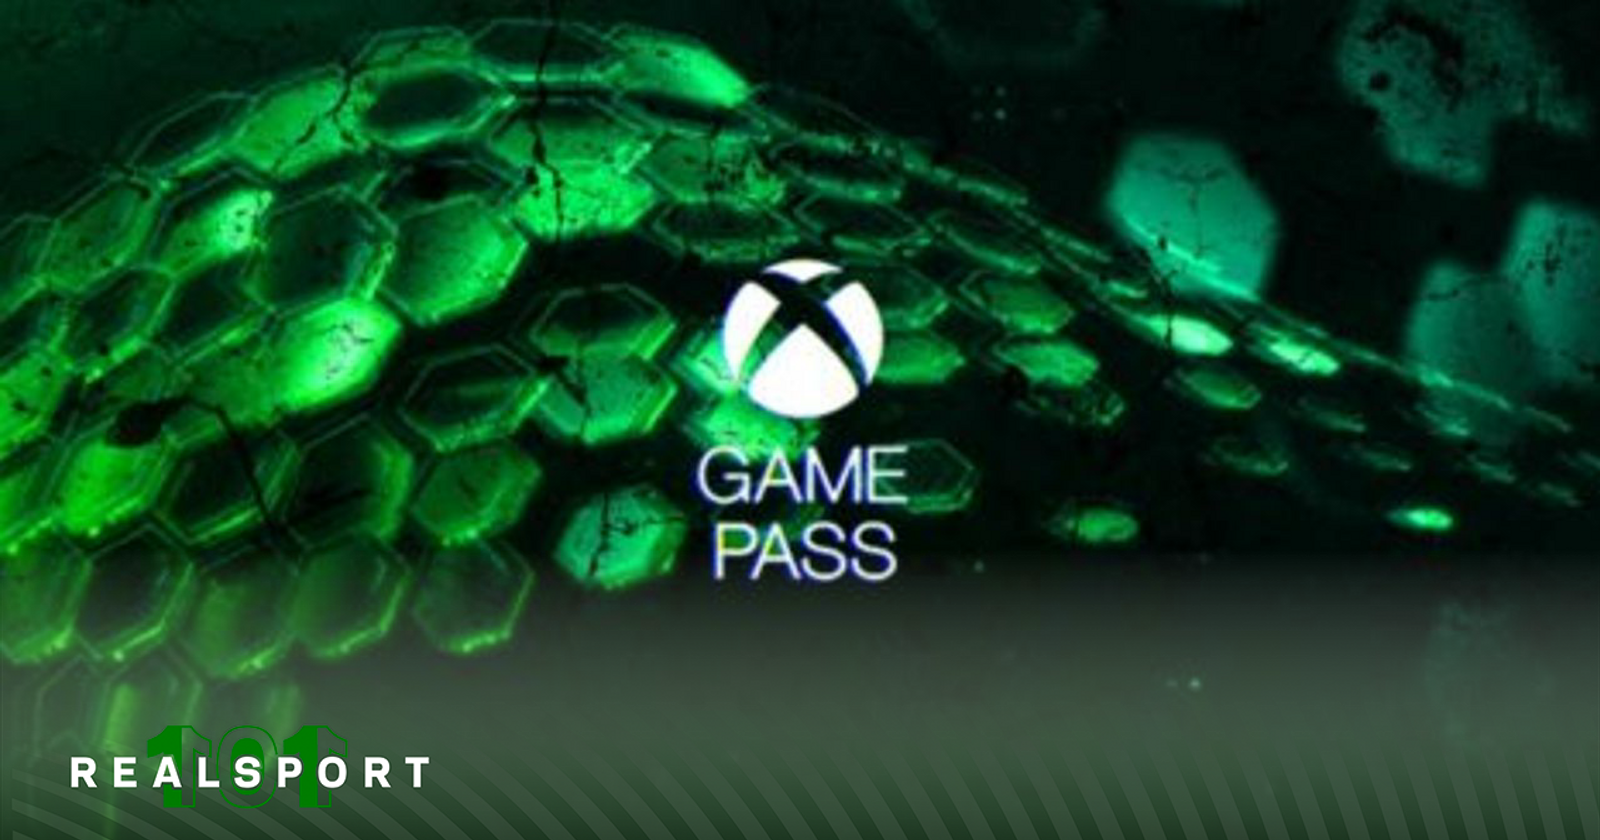 They're ADDING all the Games to the GAME PASS in February.. 🤯 #Xbox #